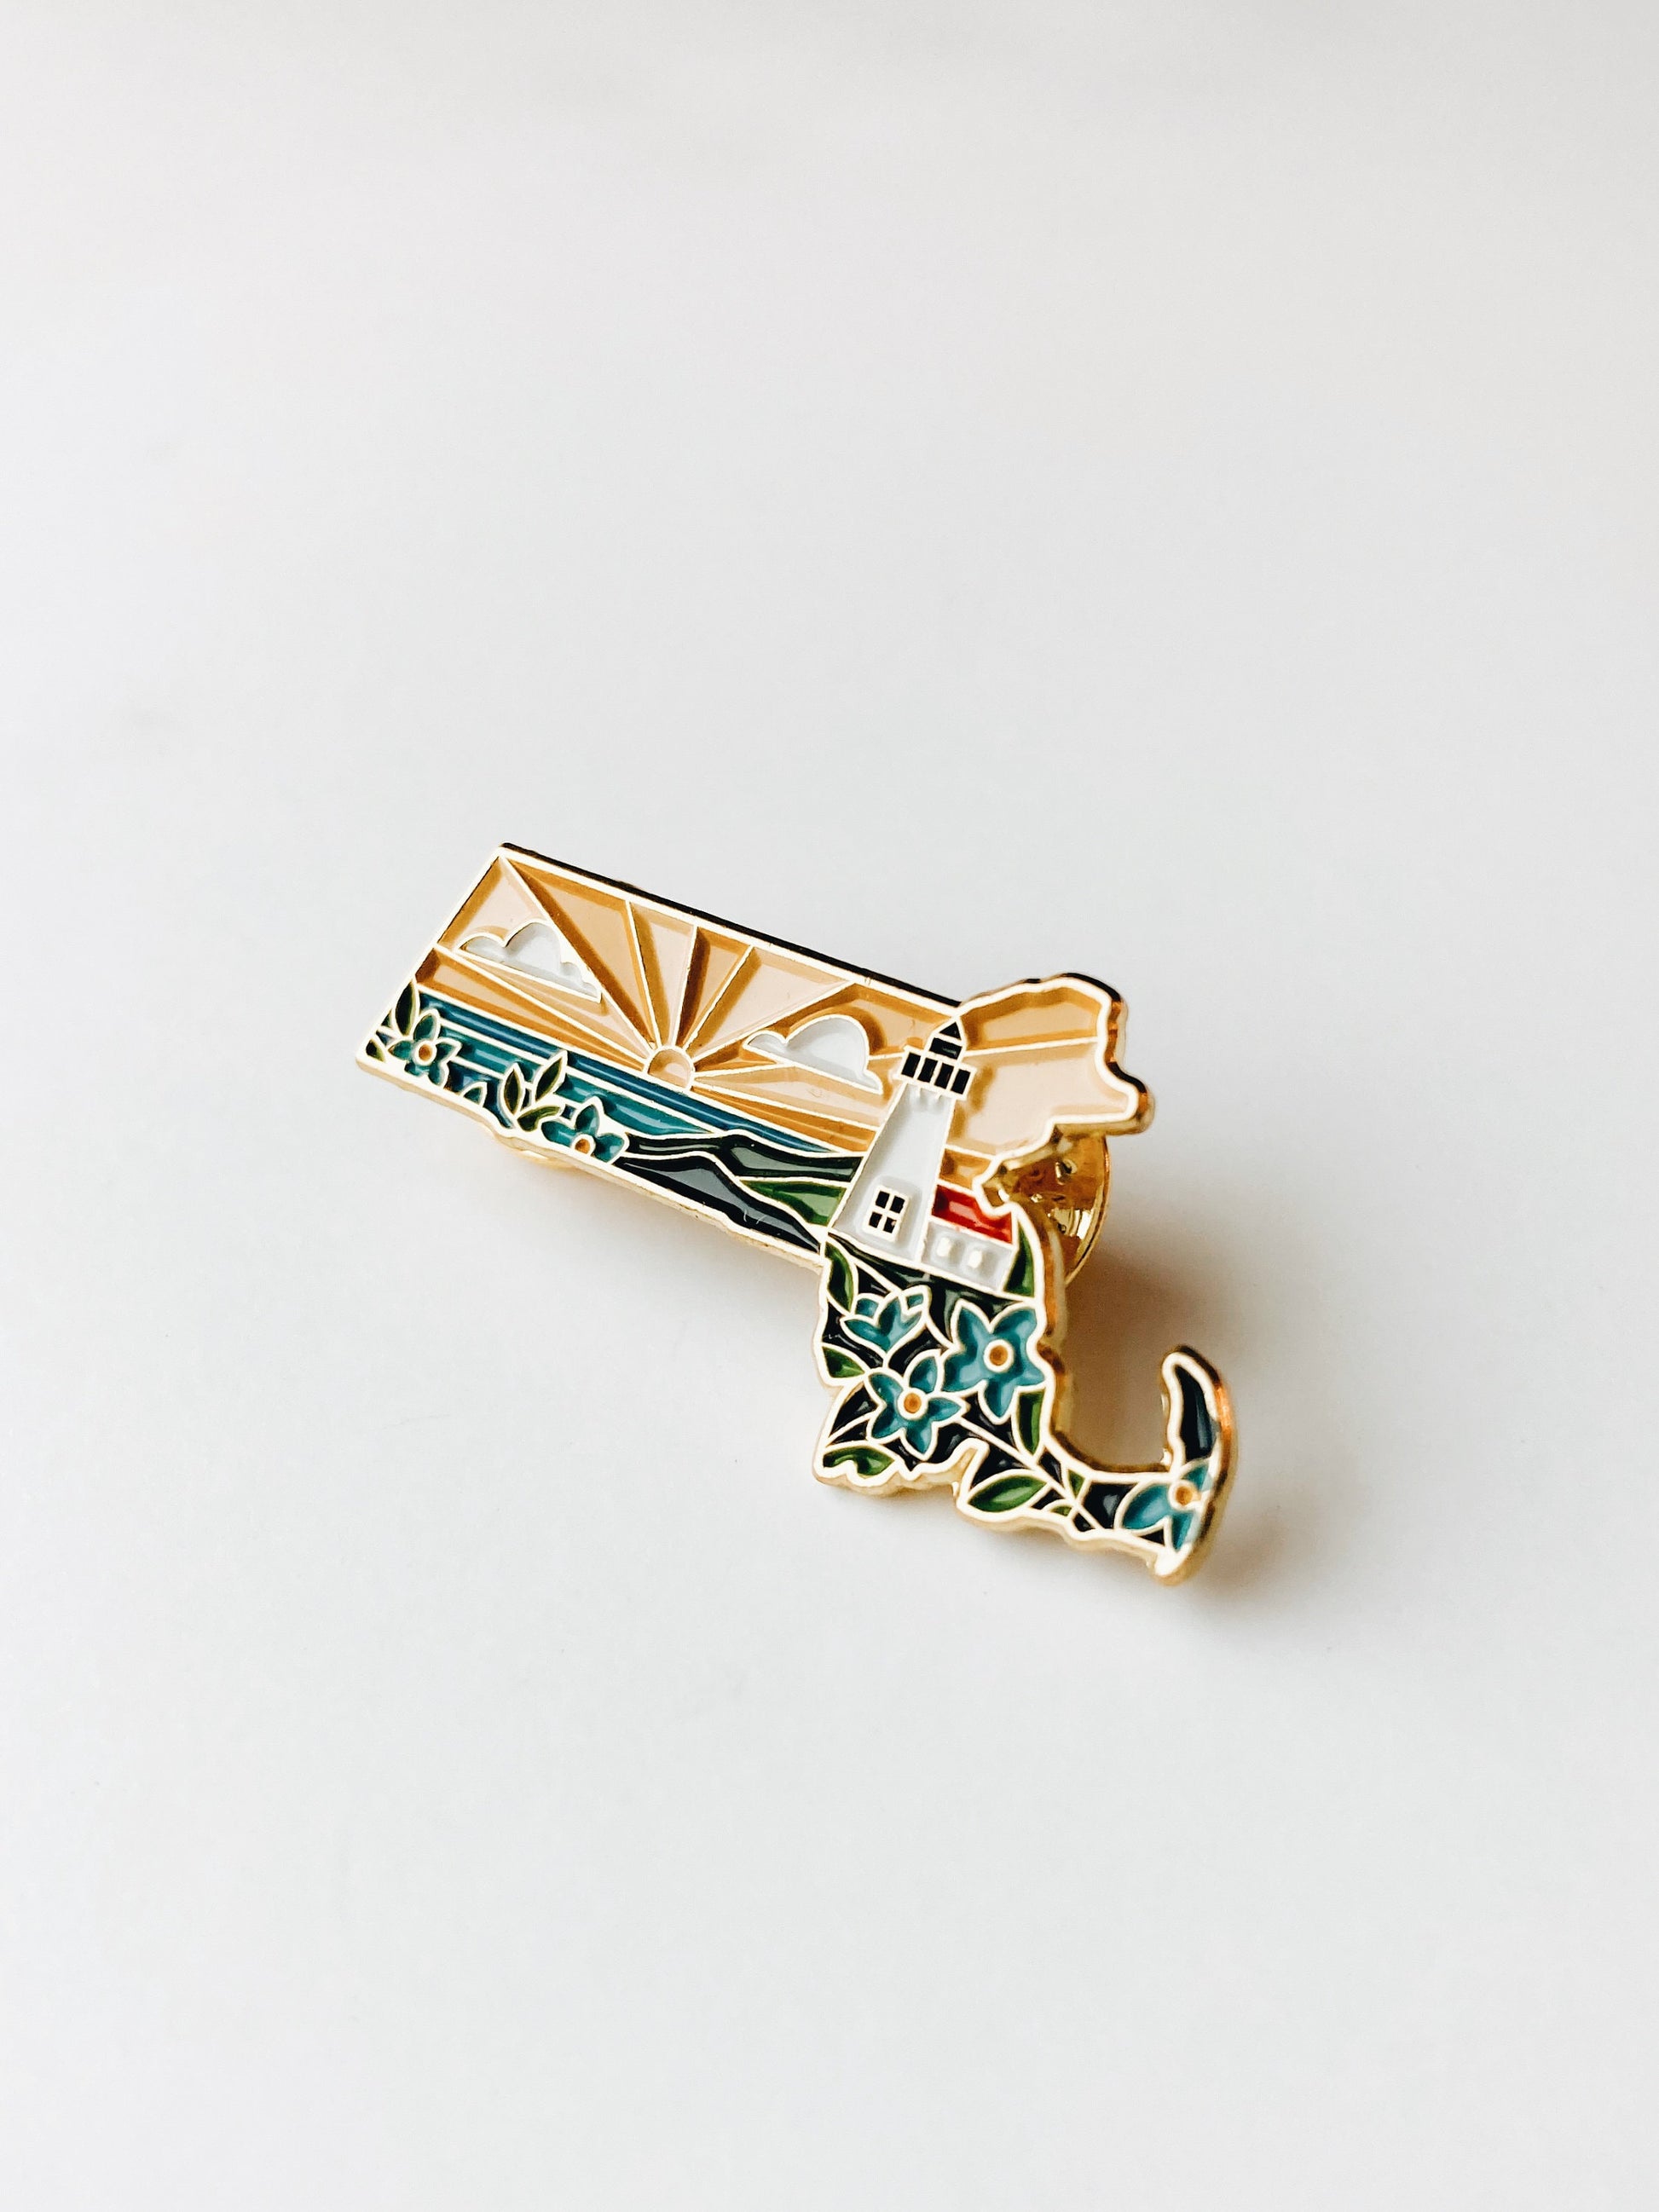 Massachusetts Enamel Pin | Gold Soft Enamel Pin | Illustrated United States Pin | Butterfly Clasp | 1.25"